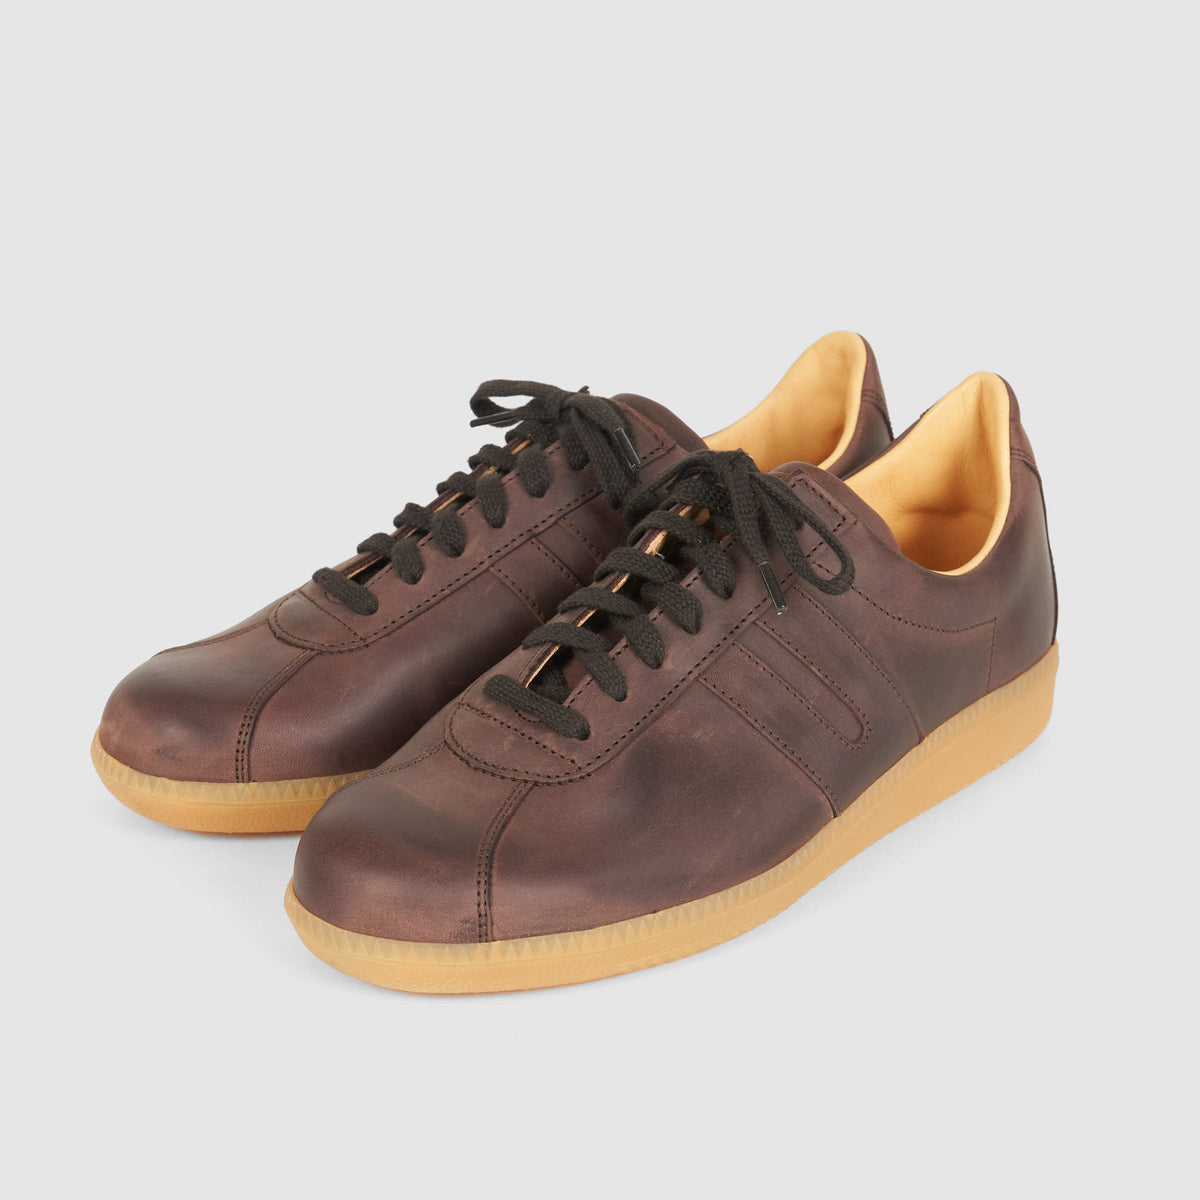 Ludwig Reiter All Leather Sneaker